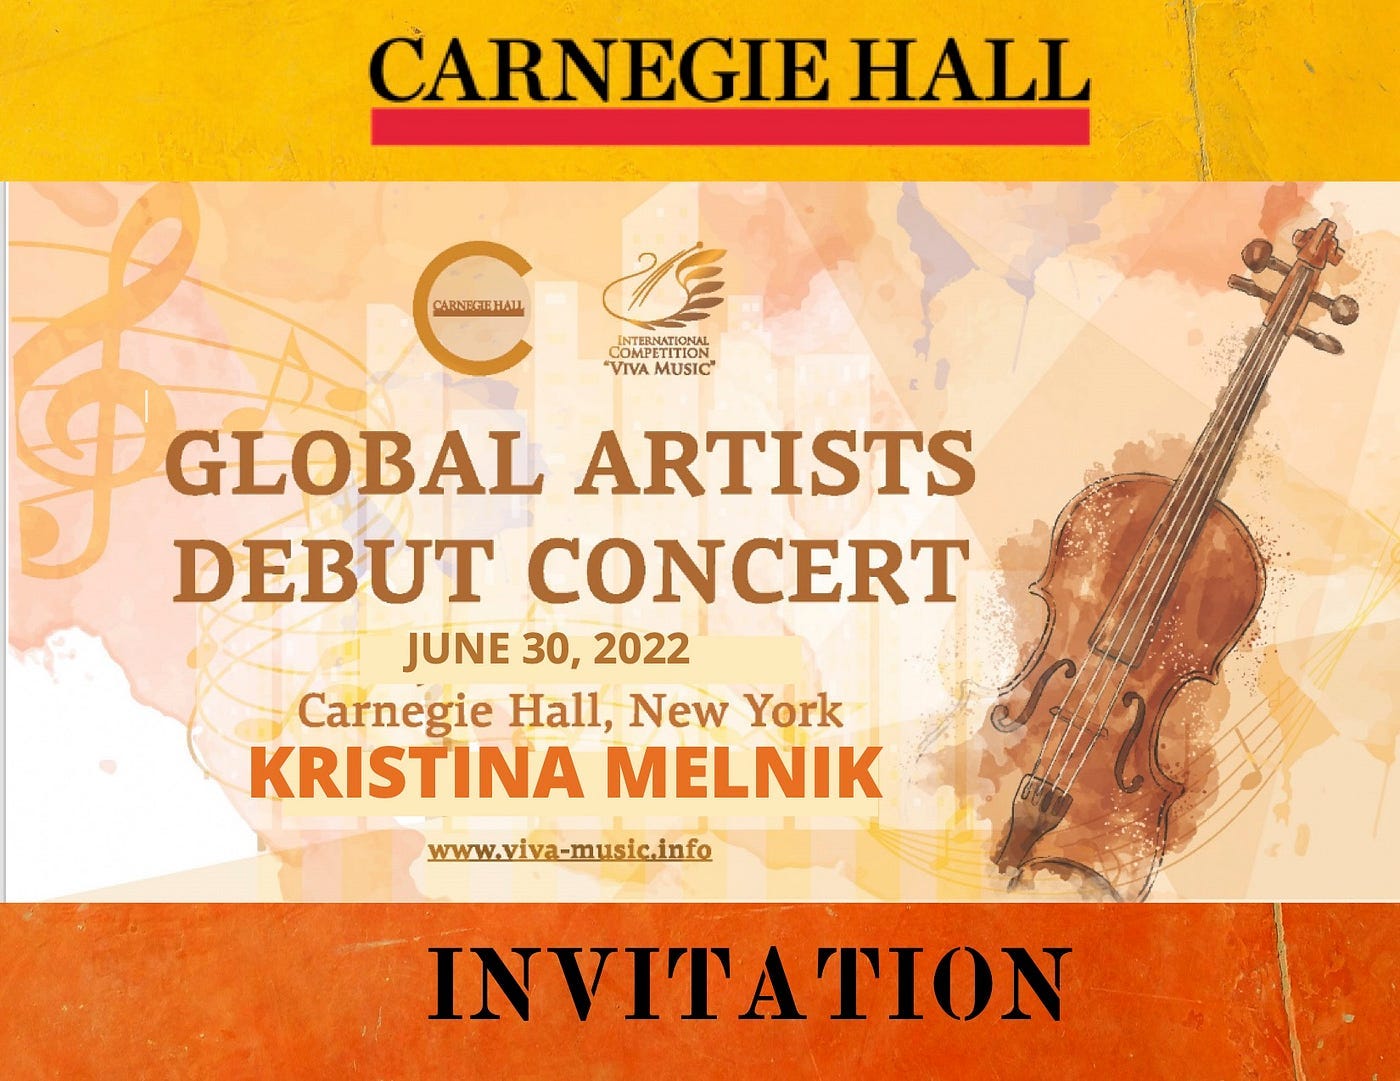 A formal invitation document to a young artist, Kristina, to debut in Carnegie Hall.